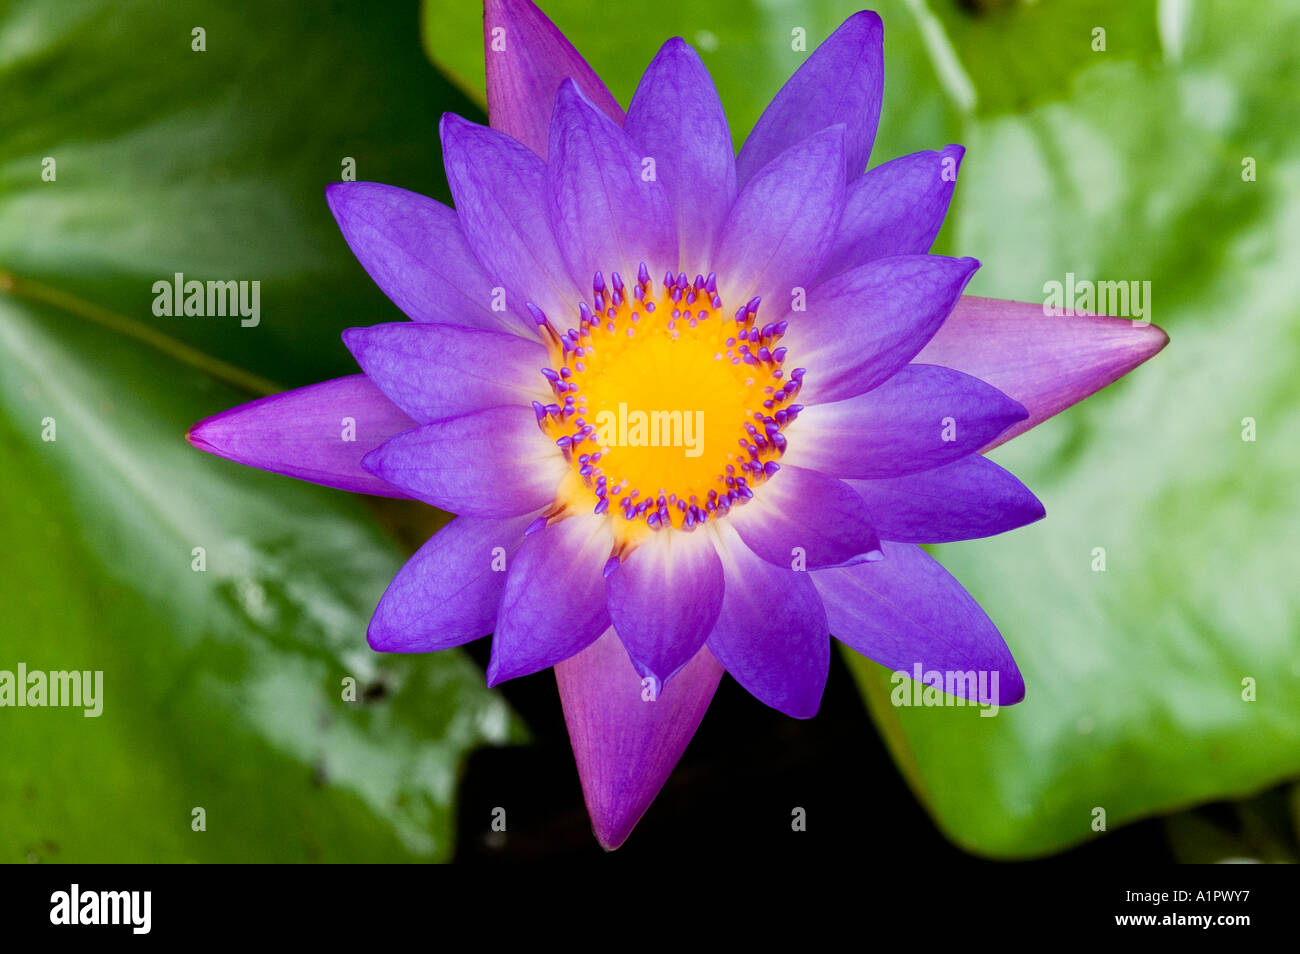 Asia Malaysia Purple and yellow lotus flower in full bloom Stock Photo